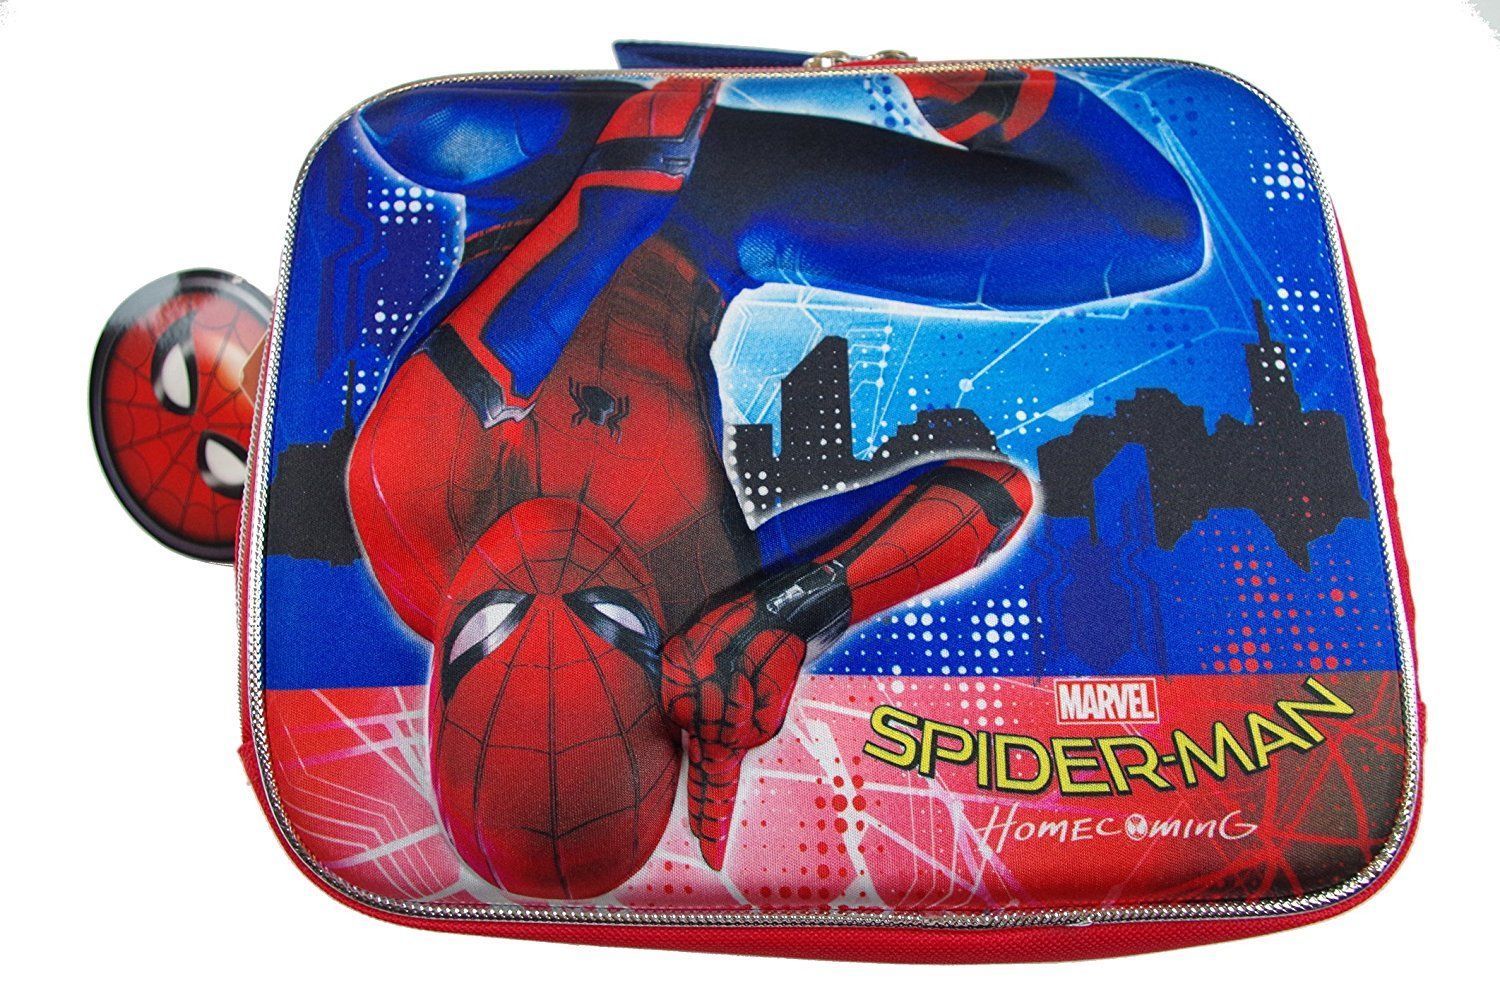 Marvel Spiderman Glowing 3-D Lunch Box W/ Long Strap For Boys | Kids Lunchbox - $6.79